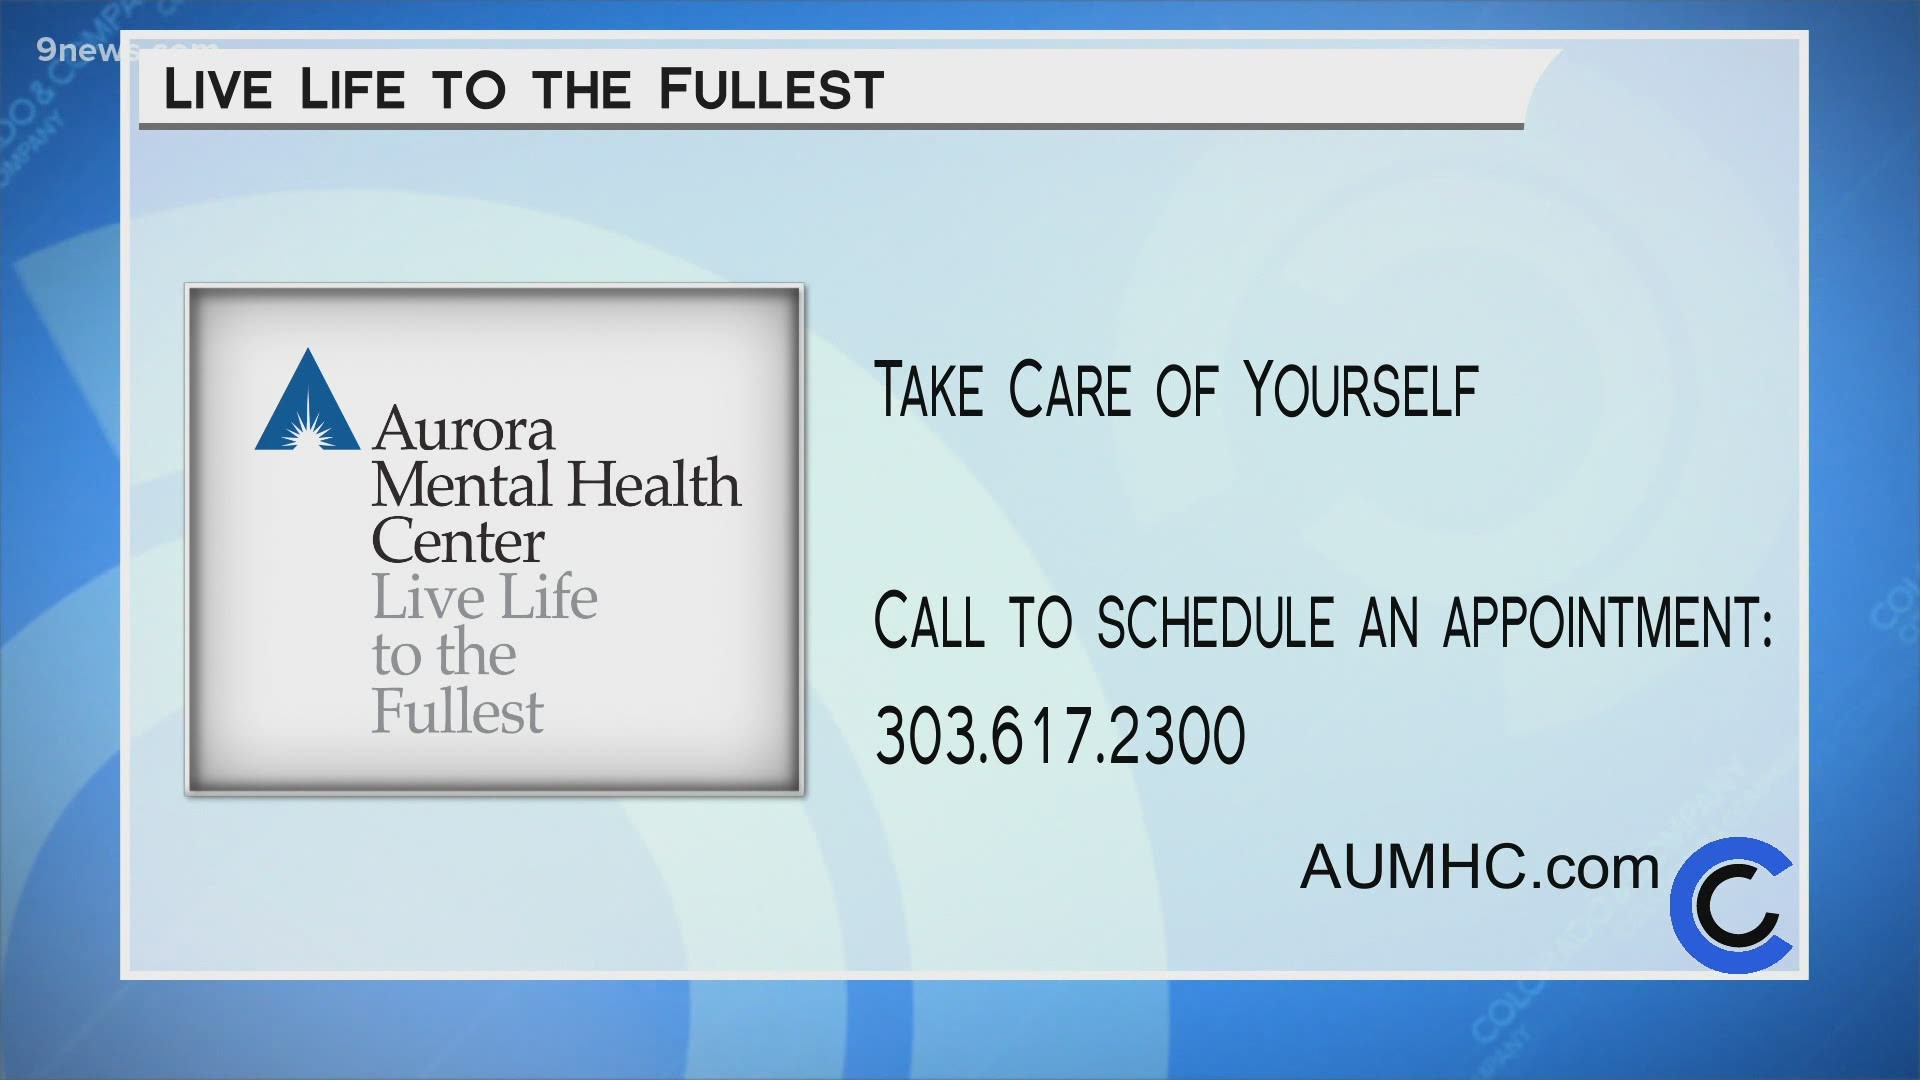 Call 303.617.2300 or visit AUMHC.org to find resources to help get you through these tough times.